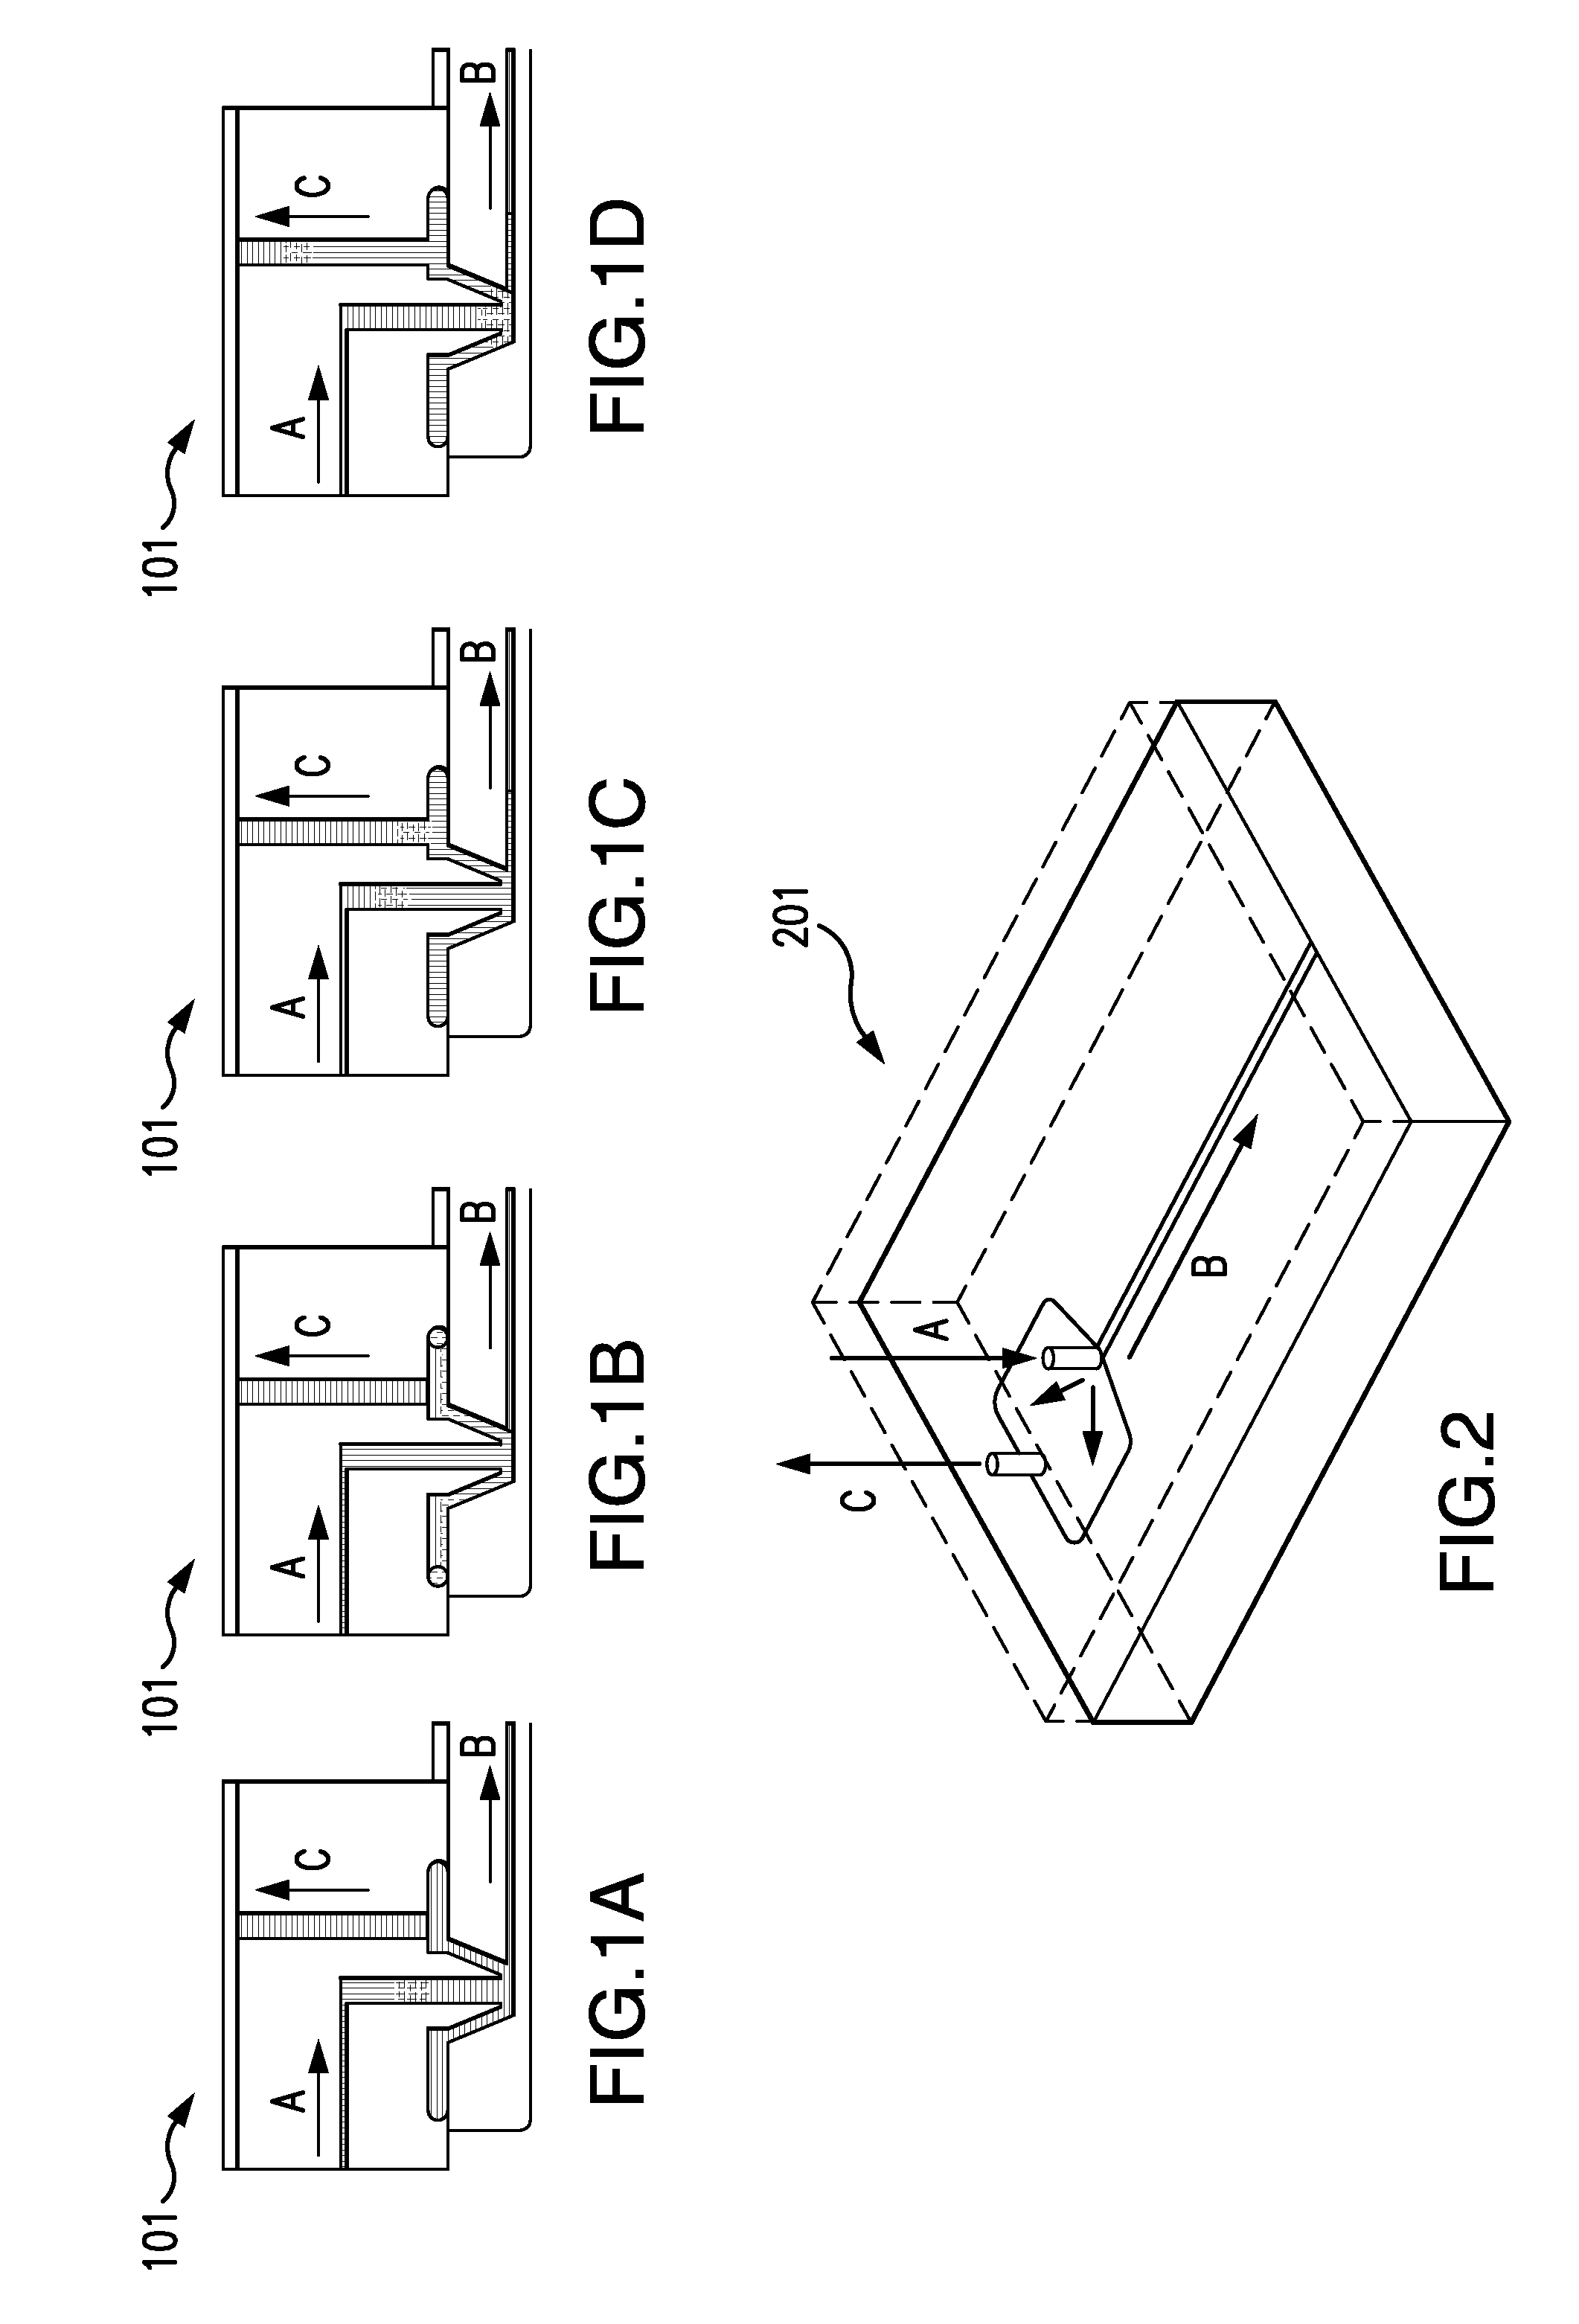 Systems and methods for minimization or elimination of diffusion effects in a microfluidic system